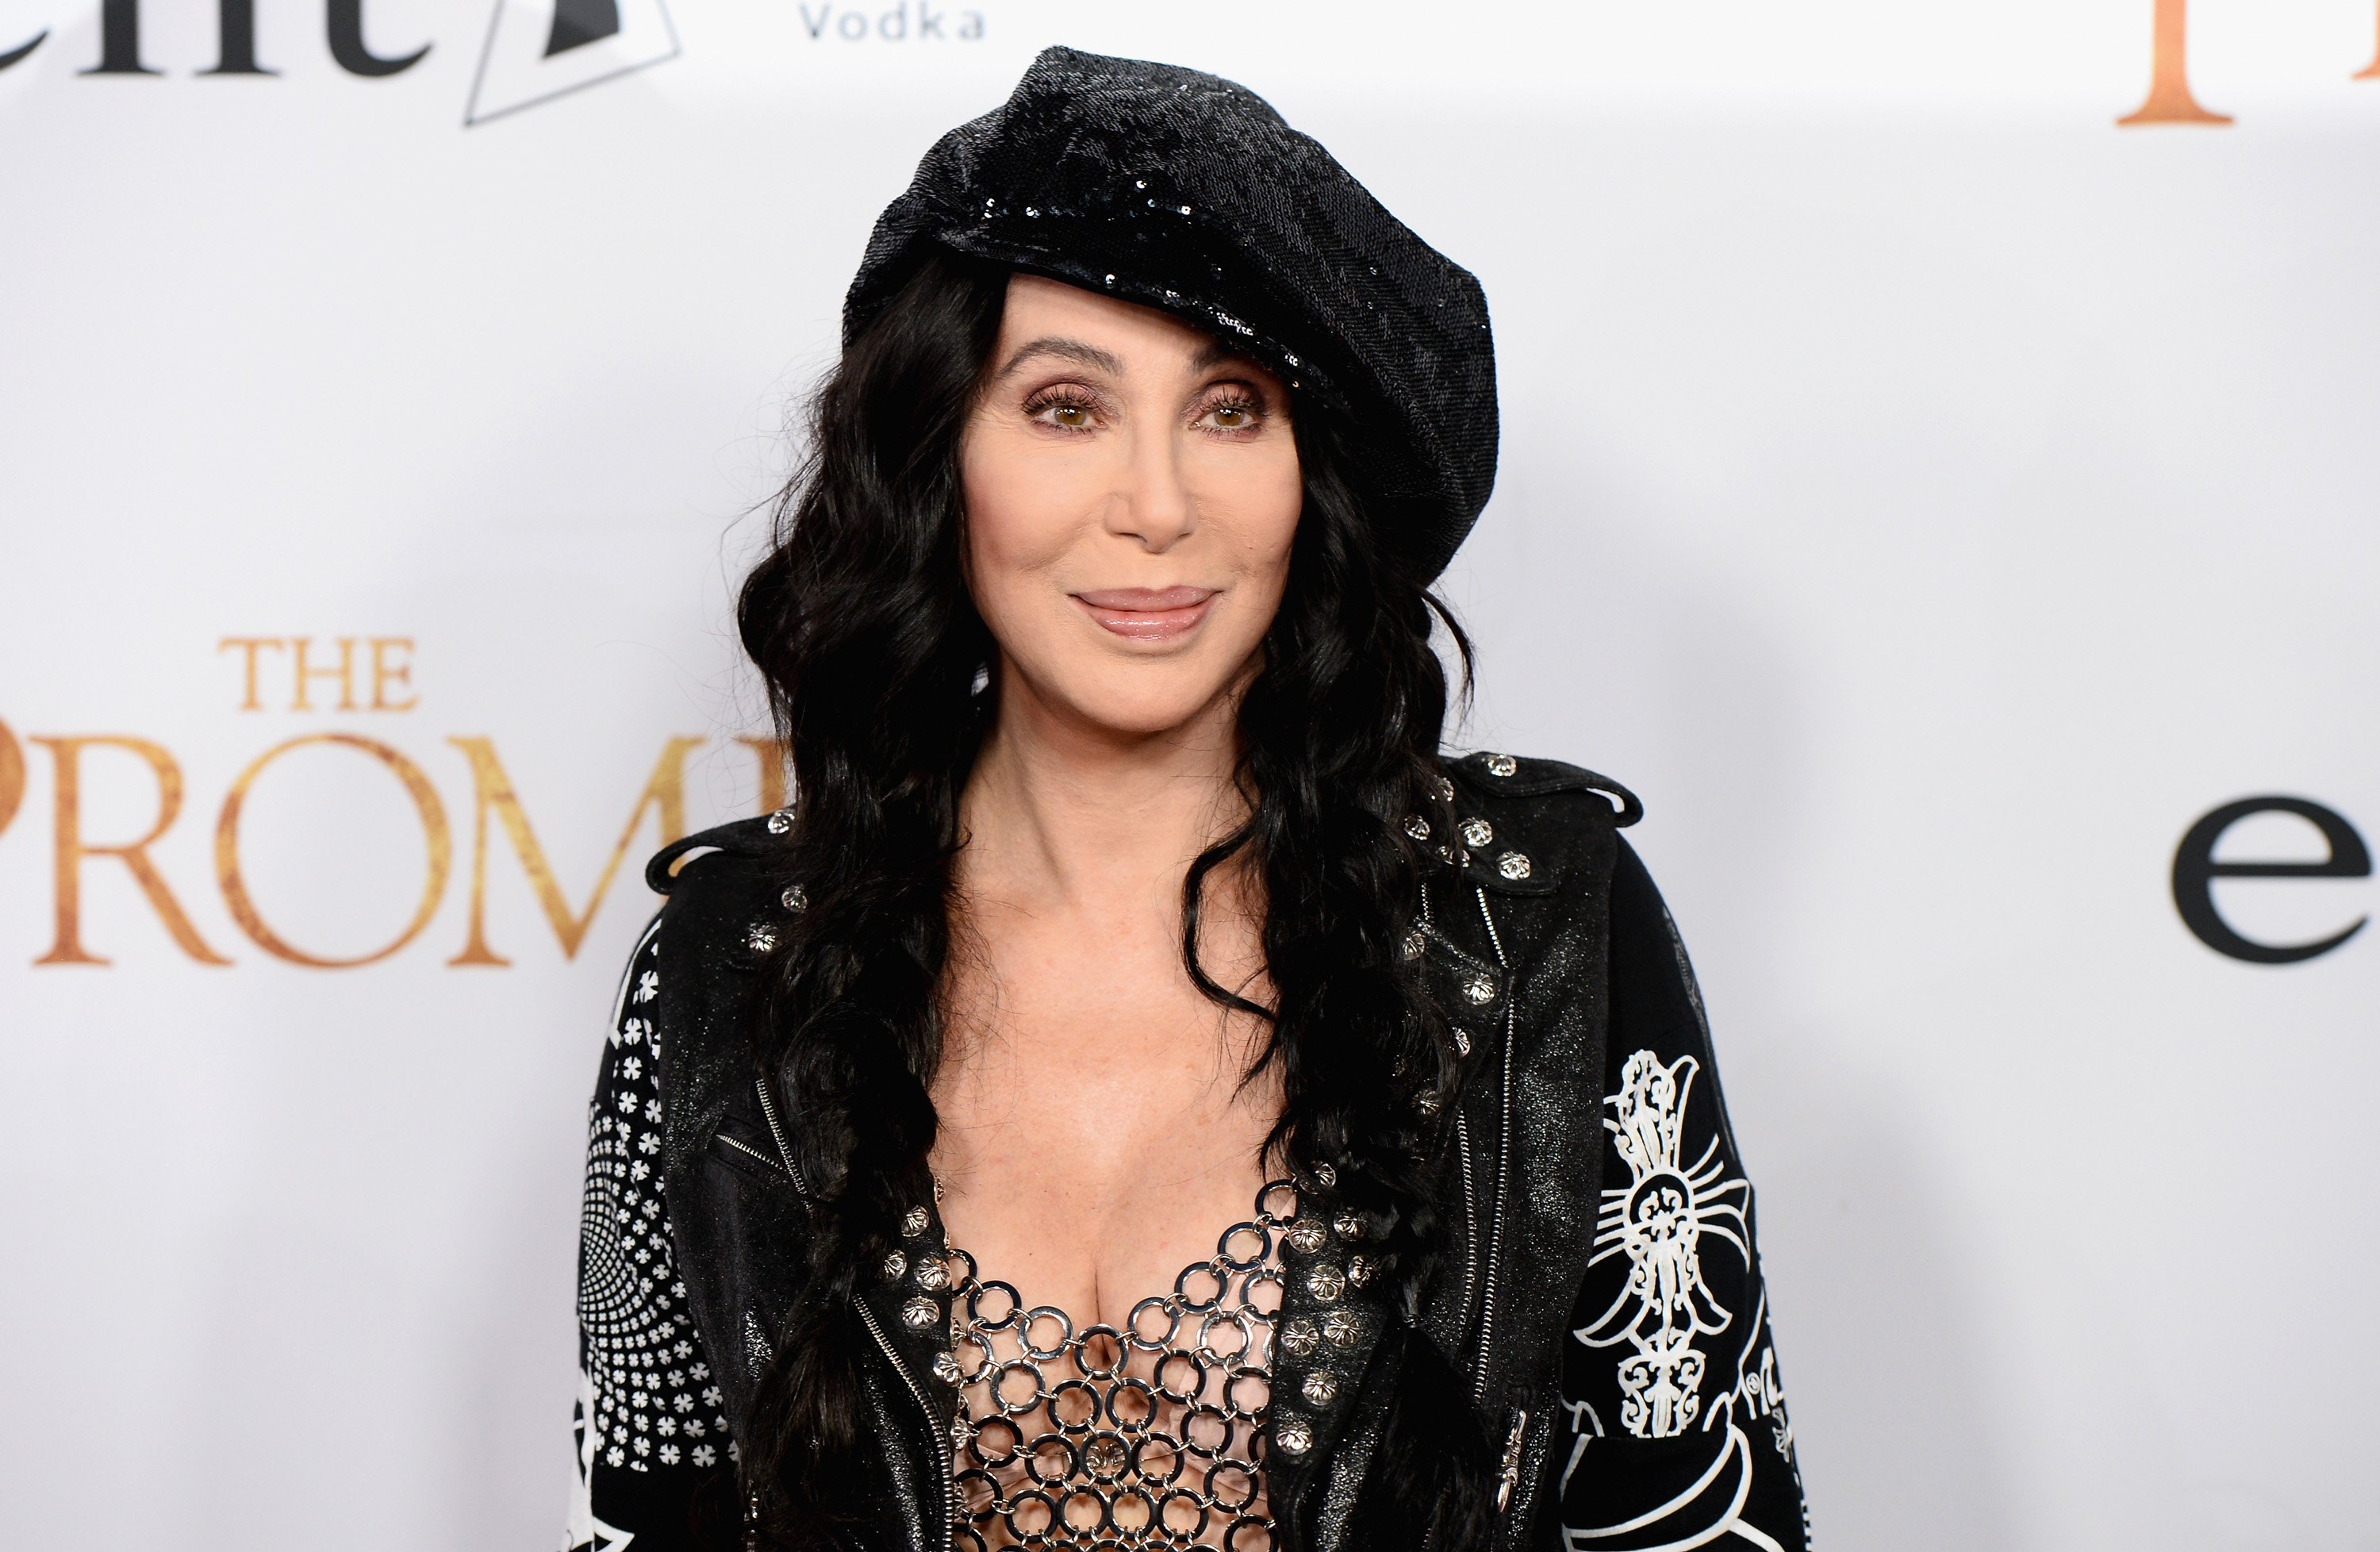 Cher arrives to the Los Angeles premiere of 'The Promise' at TCL Chinese Theatre on April 12, 2017 in Hollywood, California. | Source: Getty Images